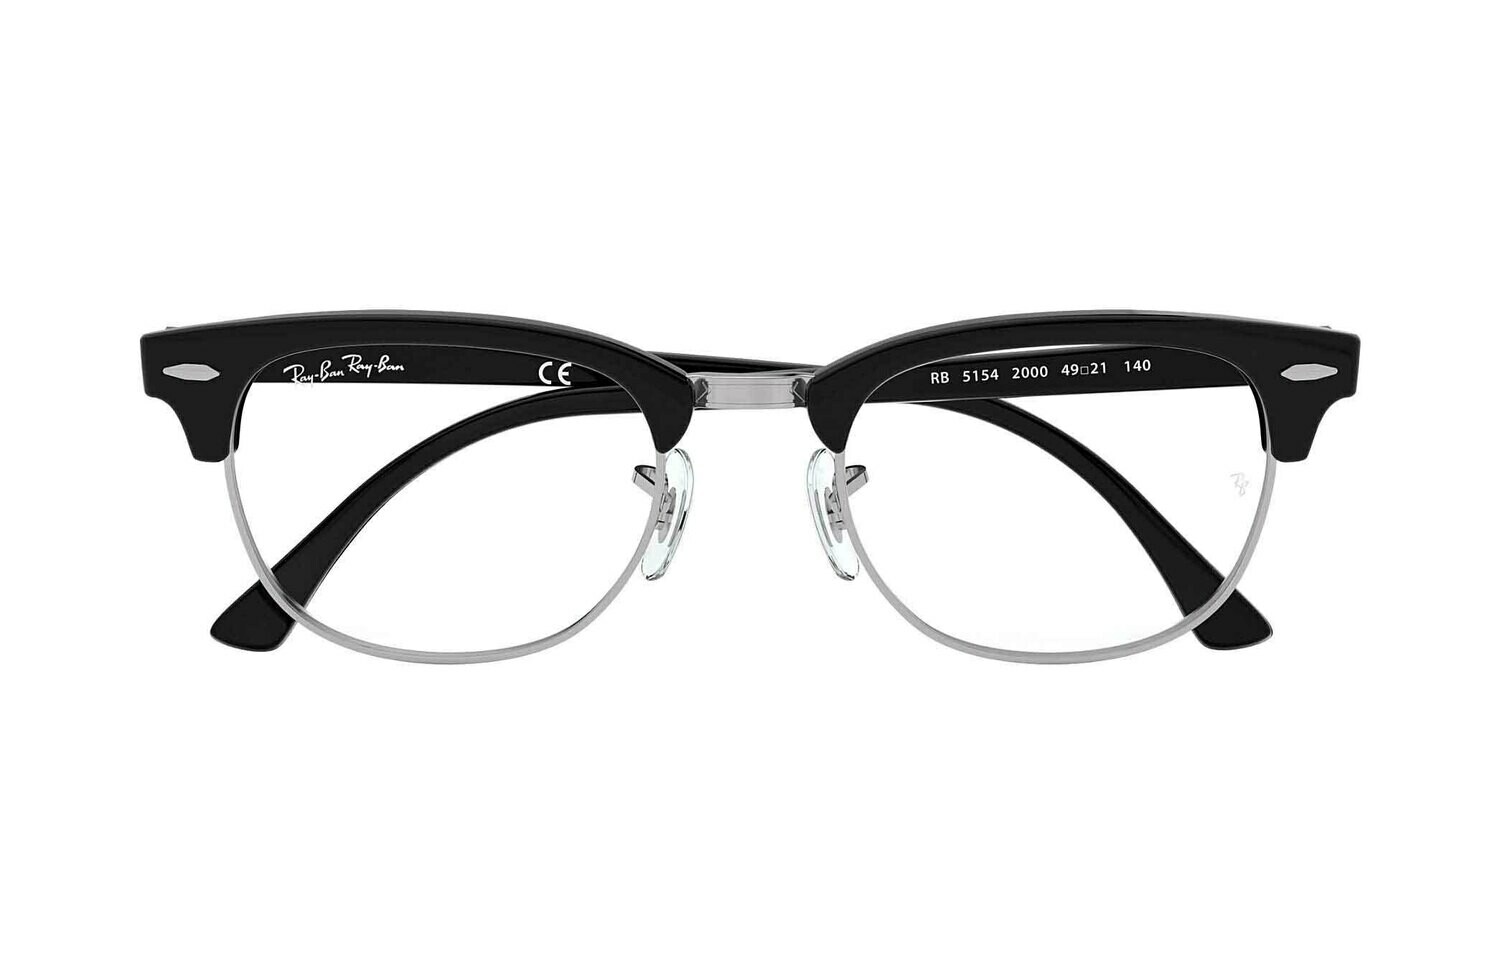 Ray Ban RX5154 Clubmaster Glasses | Reglaze Specs - Products and ...